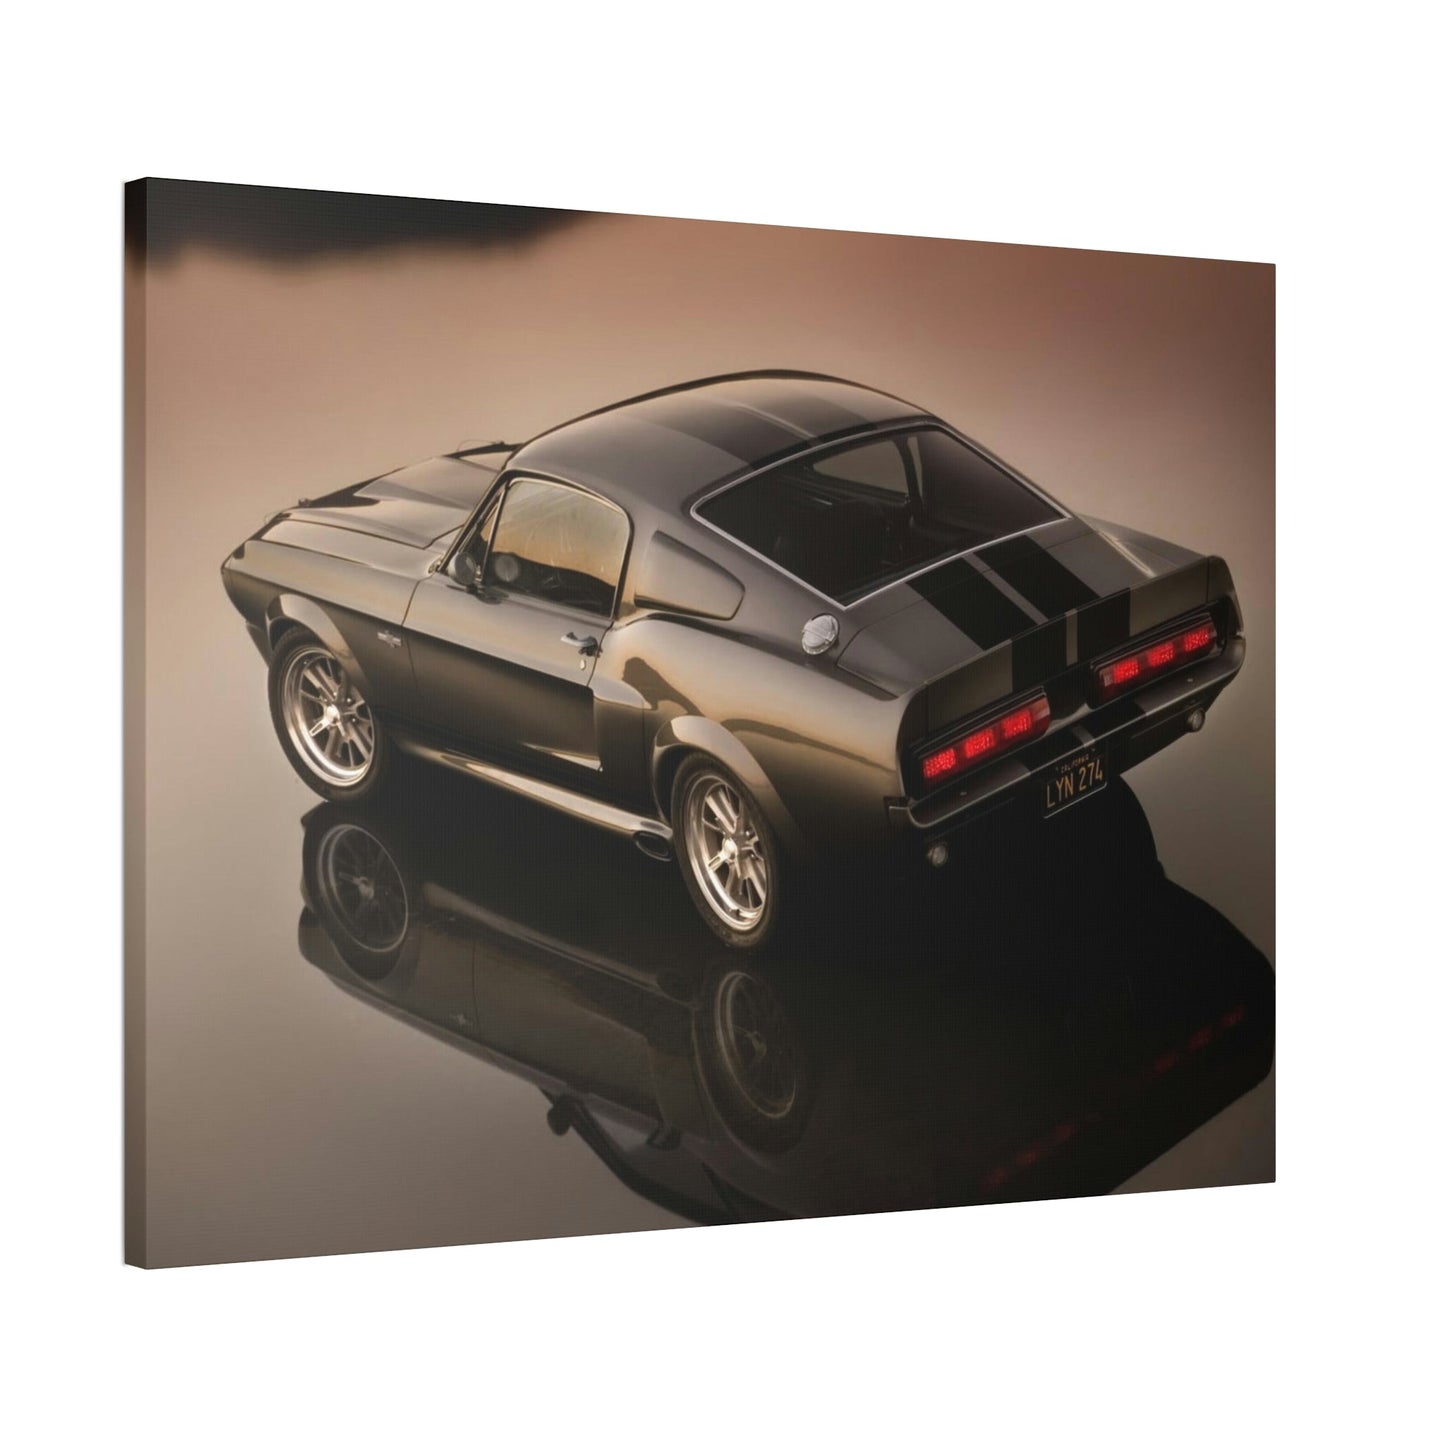 Masterpiece on Wheels: Framed Canvas Poster of a Mustang Sports Car for Automotive Art Collectors